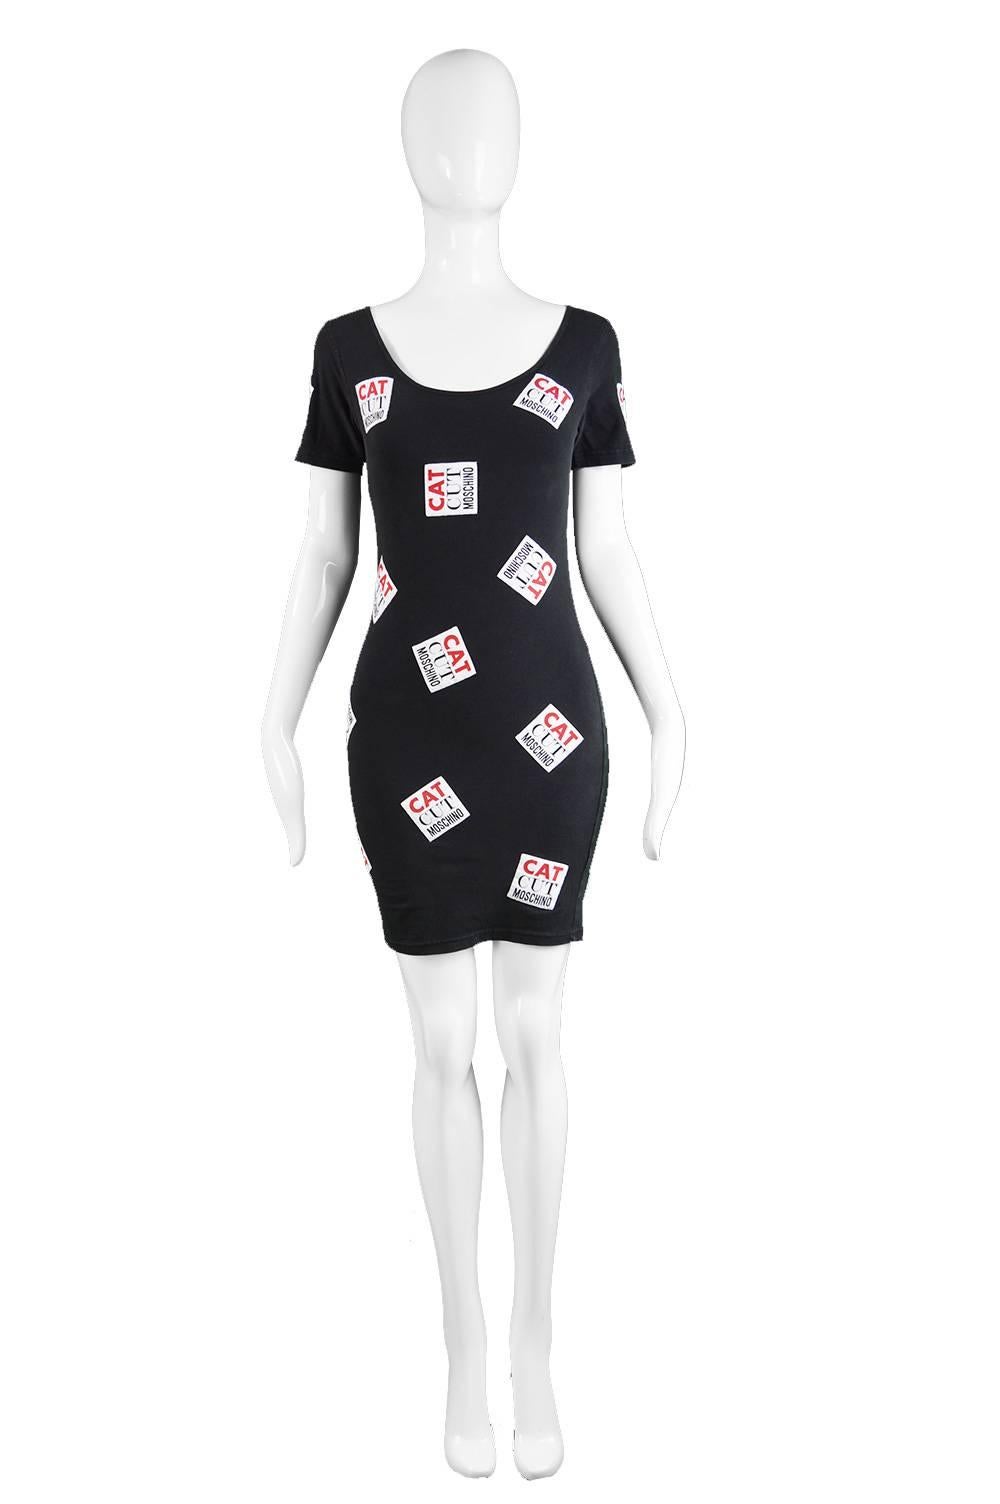 A stunning vintage Moschino mini party dress from the 90s, Made prior to 1995 before Moschino Jeans stopped being produced by Simint. With novelty, fun 'cat cut Moschino' patches / appliques throughout a black bodycon cotton-spandex jersey fabric